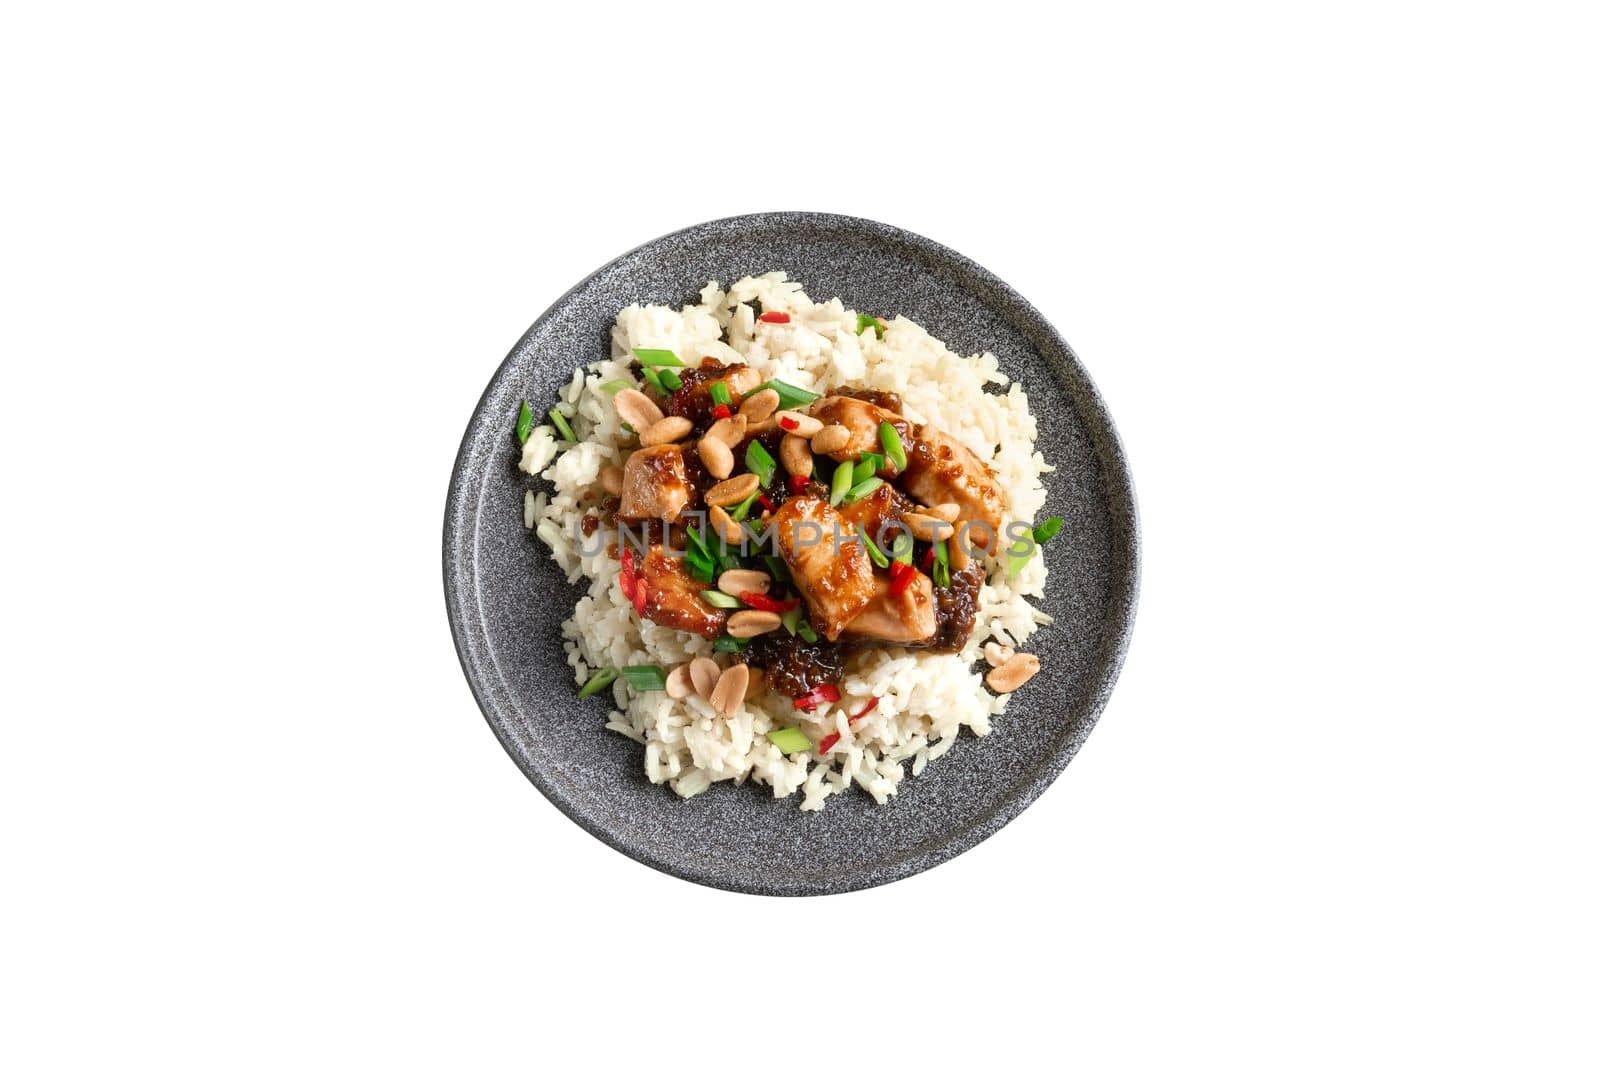 Kung Pao chicken. Isolate. Gong Bao Ji Ding on a dark concrete background. Sichuan kung pao is a Chinese dish with chicken meat, chili peppers, peanuts, sauces, and onions. Copy place. Top view.